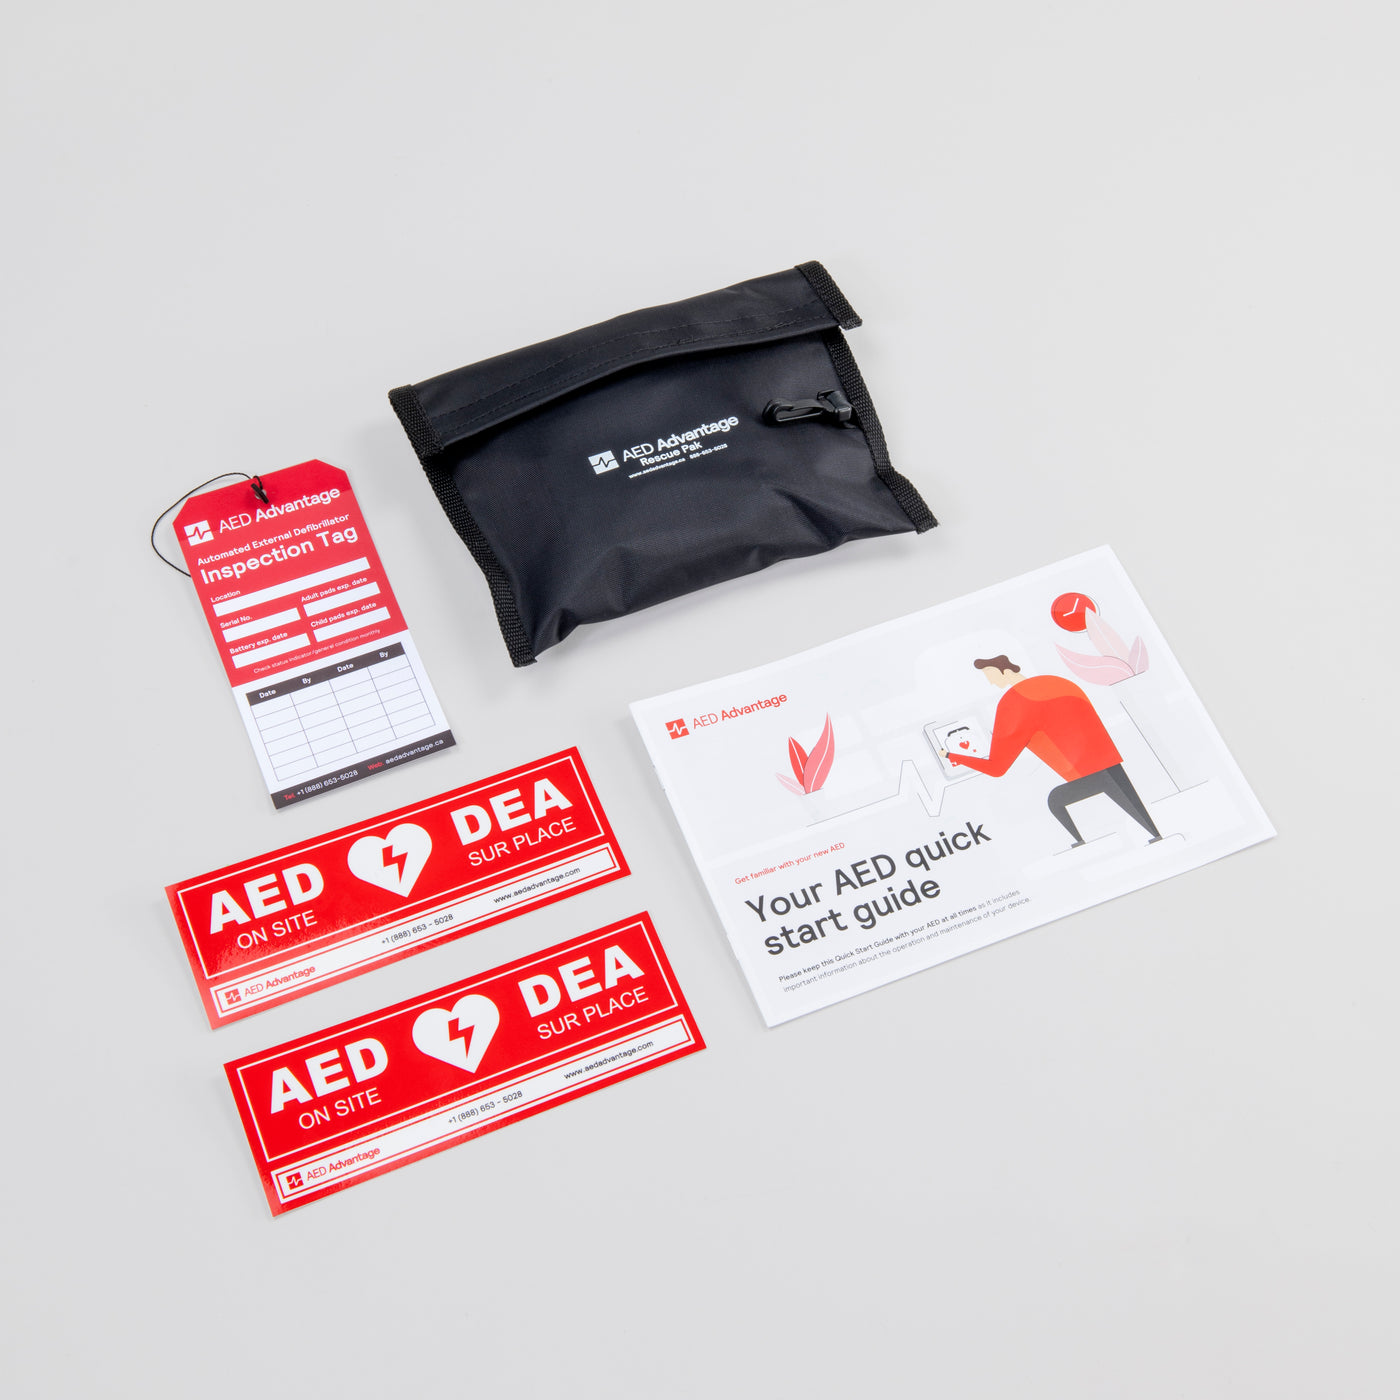 A red AED inspection tag, black rescue kit, two red door decals, and an AED quick start guide booklet